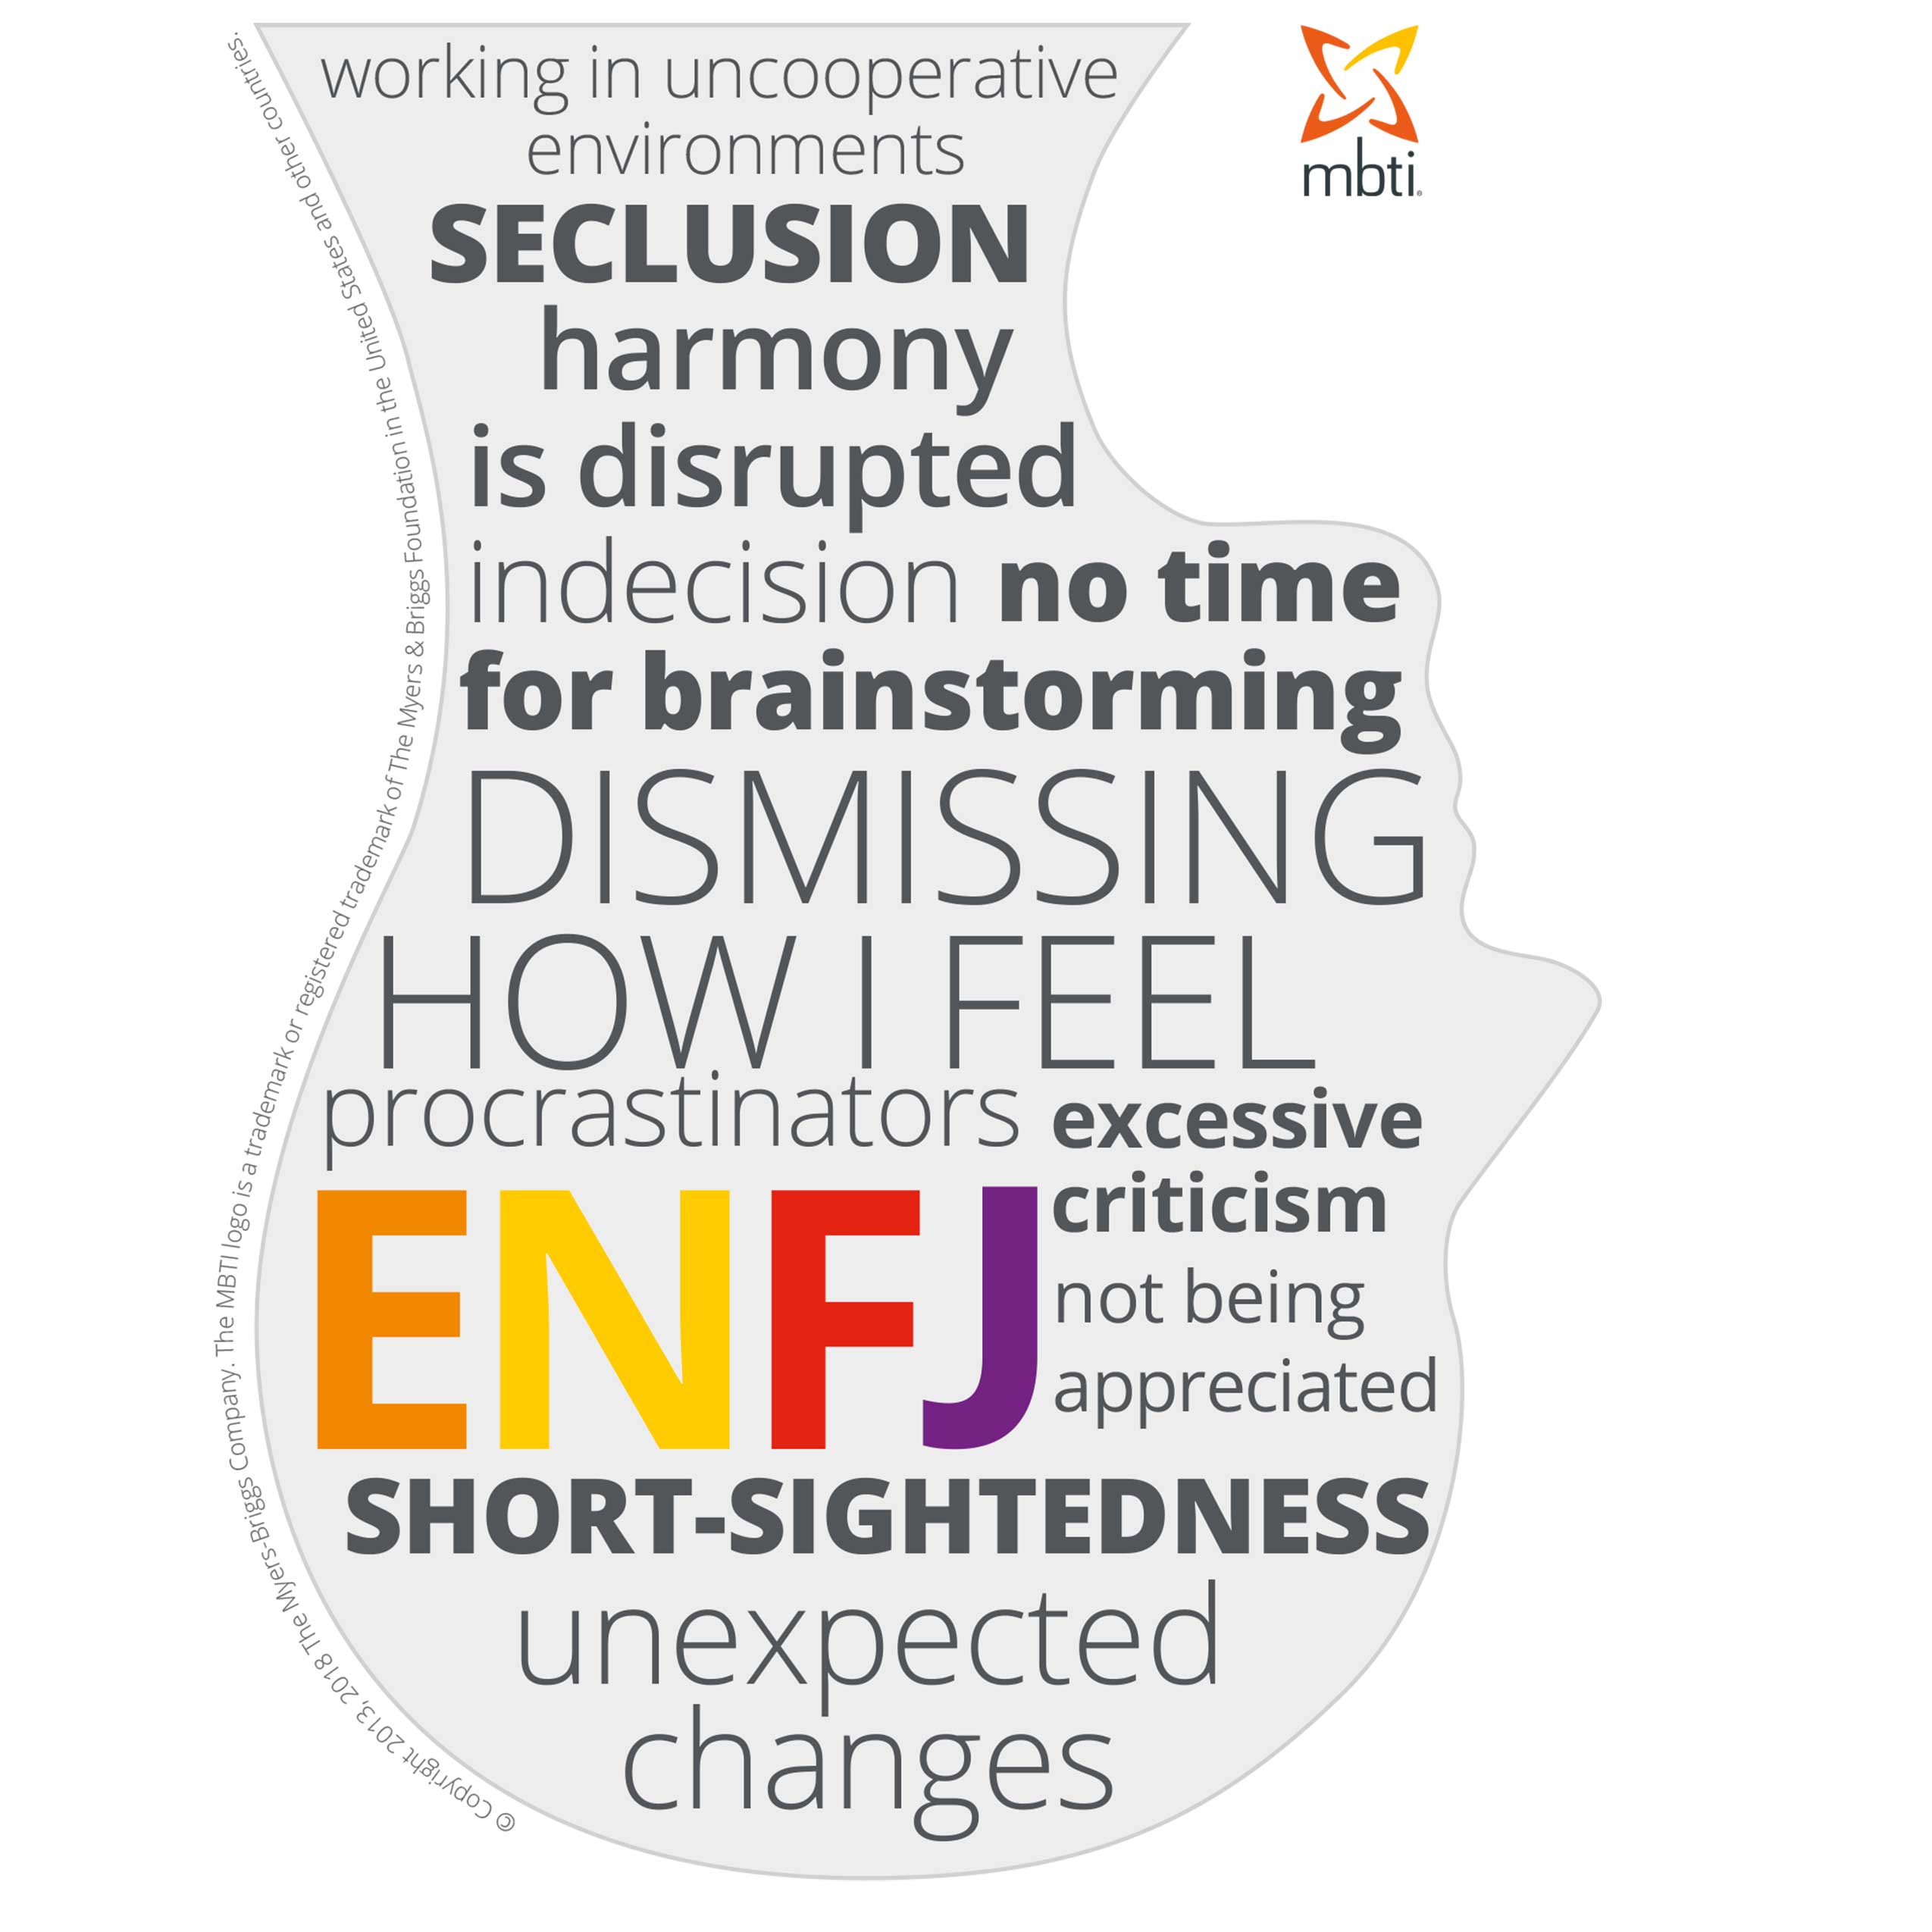 What are enfjs like in bed?